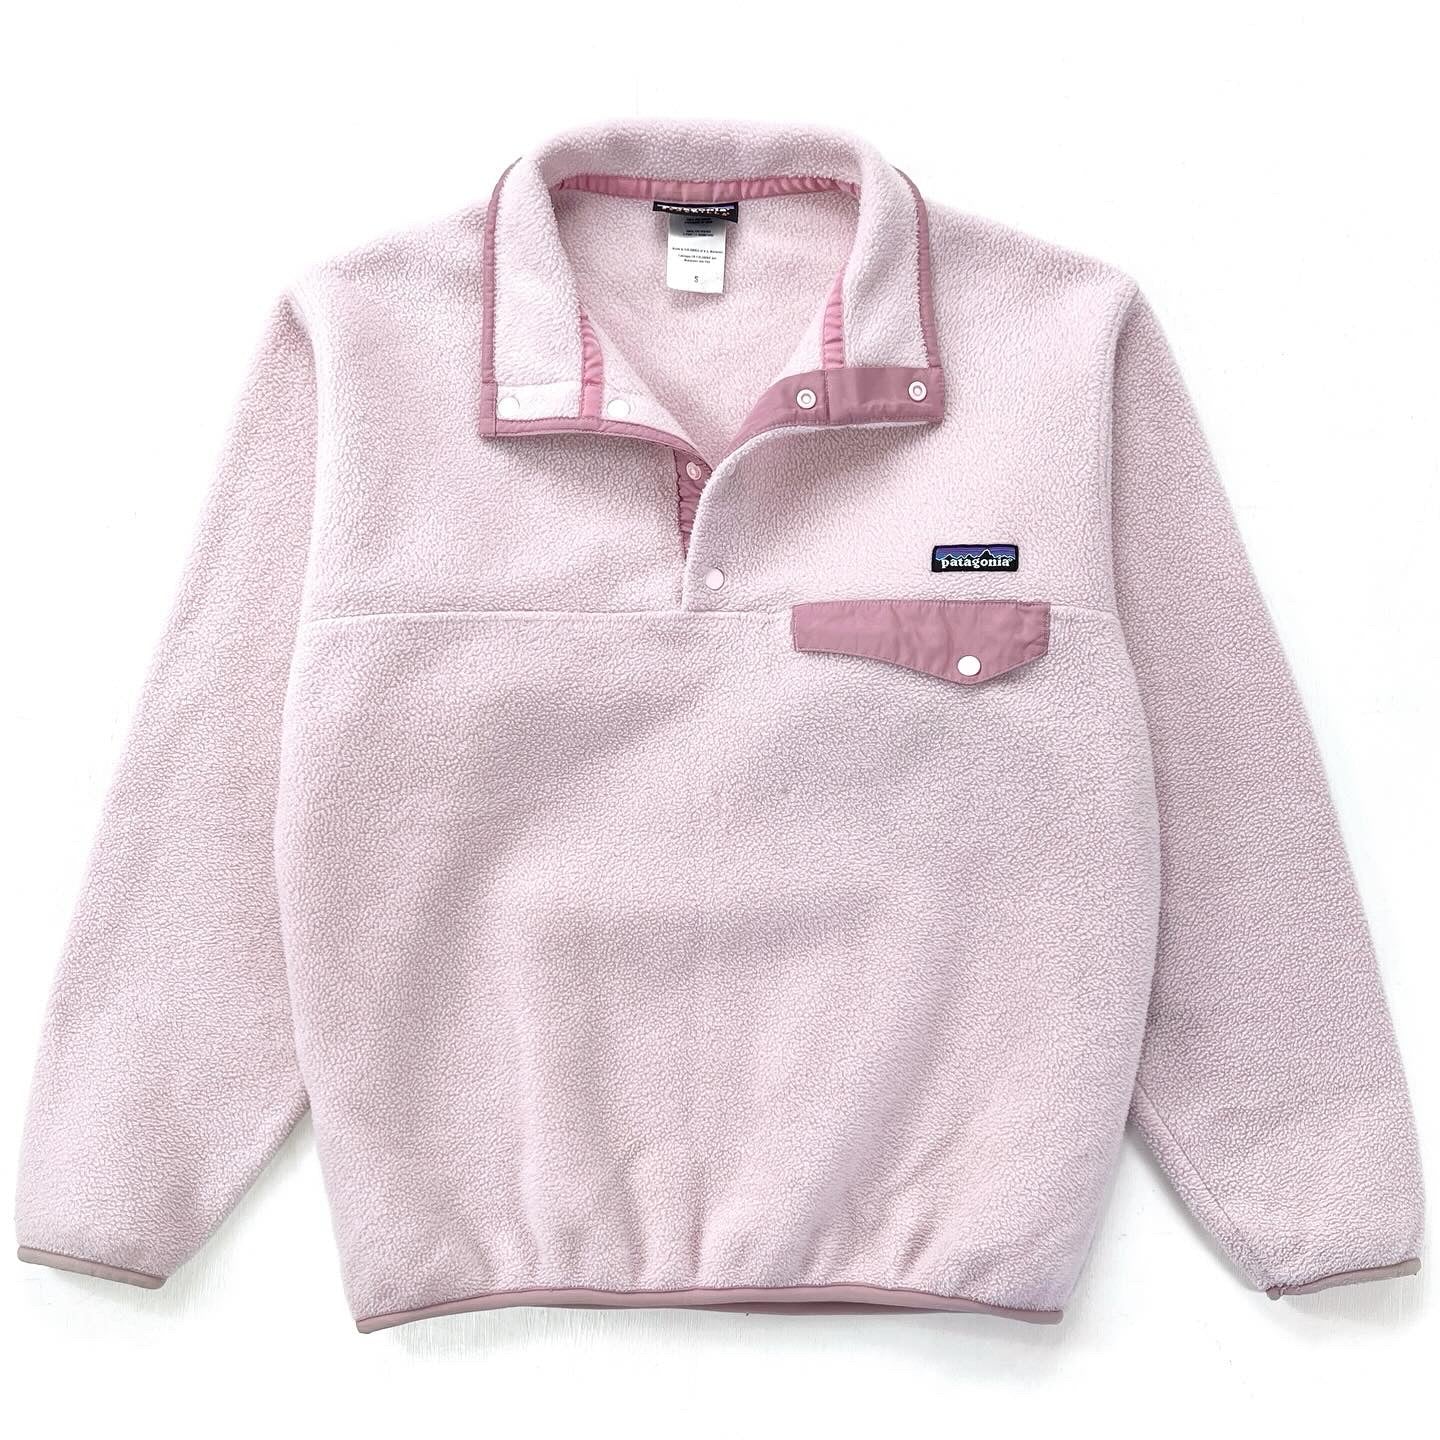 2005 Patagonia Synchilla Snap-T Fleece Pullover, Light Pink (S)